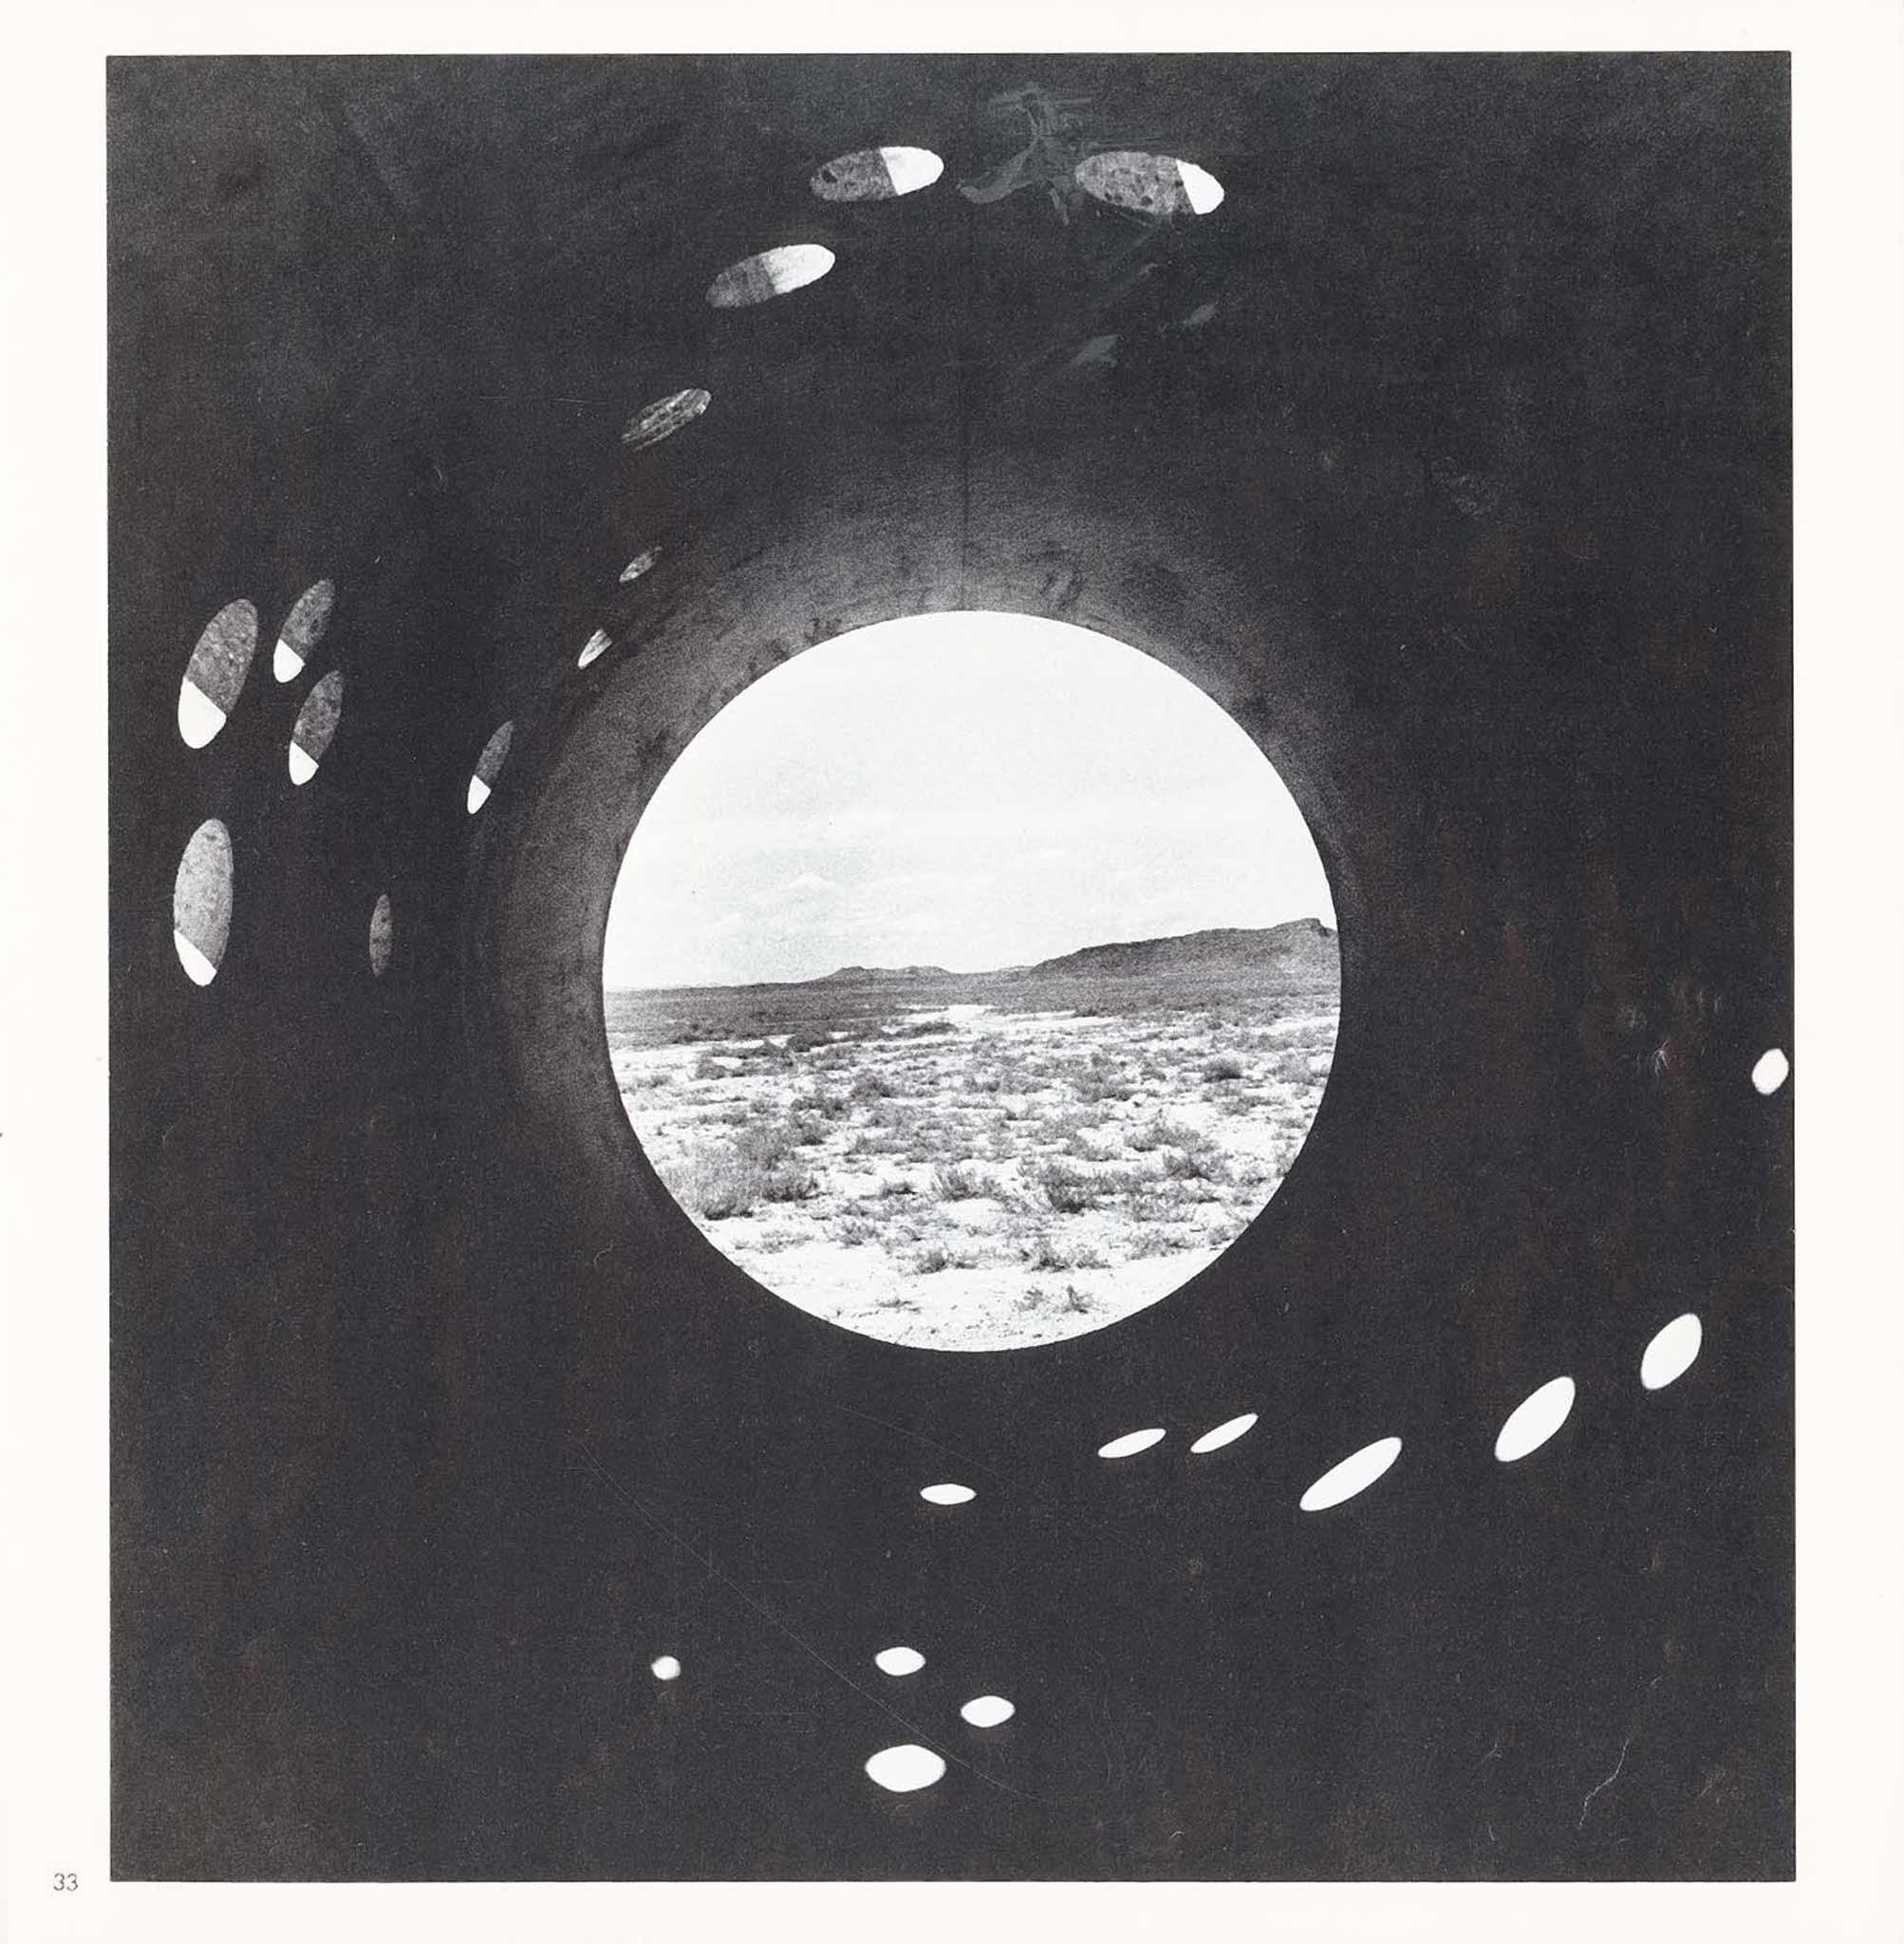 View inside a circular concrete tunnel looking out through a circular opening at the end onto the desert and mountains.  Small circular holes in the top and sides of the tunnel cast light onto the bottom of the tunnel.